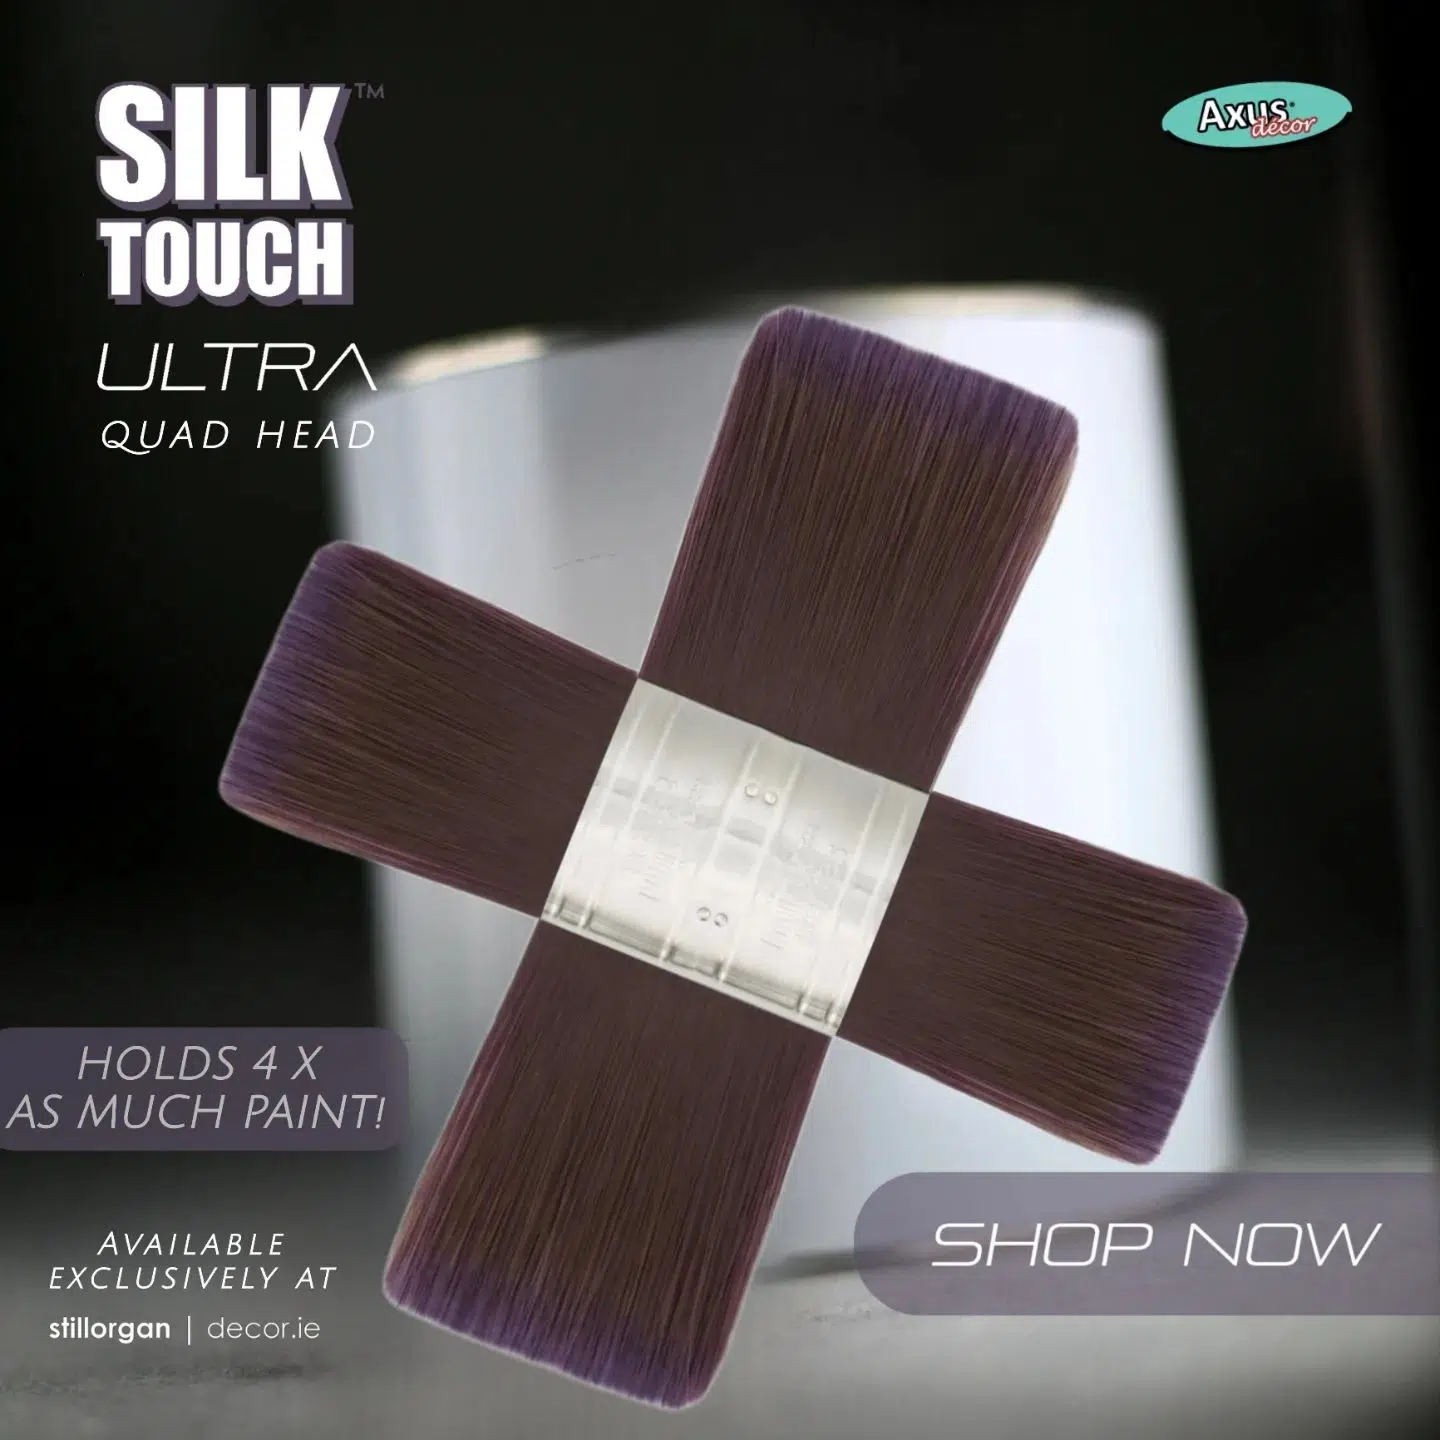 Stillorgan Decor are delighted to be exclusive stockists of the new @axusdecor Silk Touch Ultra Quad Head brush! This incredible brush holds 4 times as much paint as conventional paint brushes!